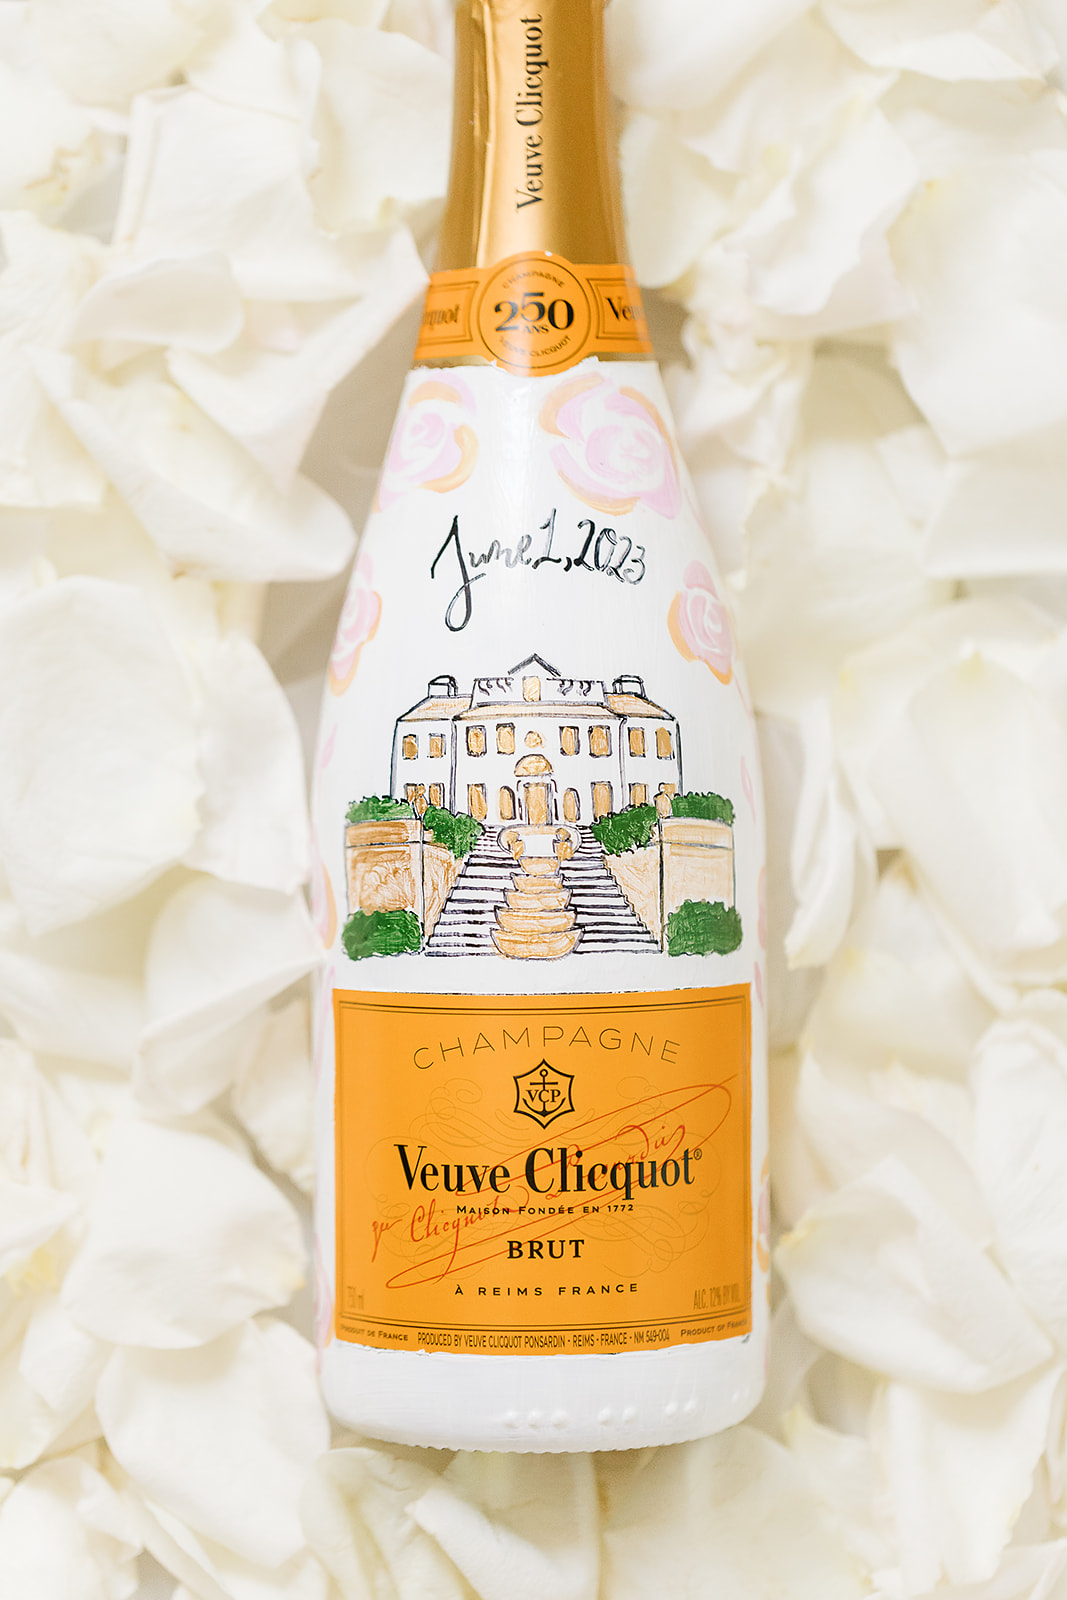 CHAMPAGNE HAND PAINTED BOTTLE OF VEUV CLIQUOT CUSTOMIZED